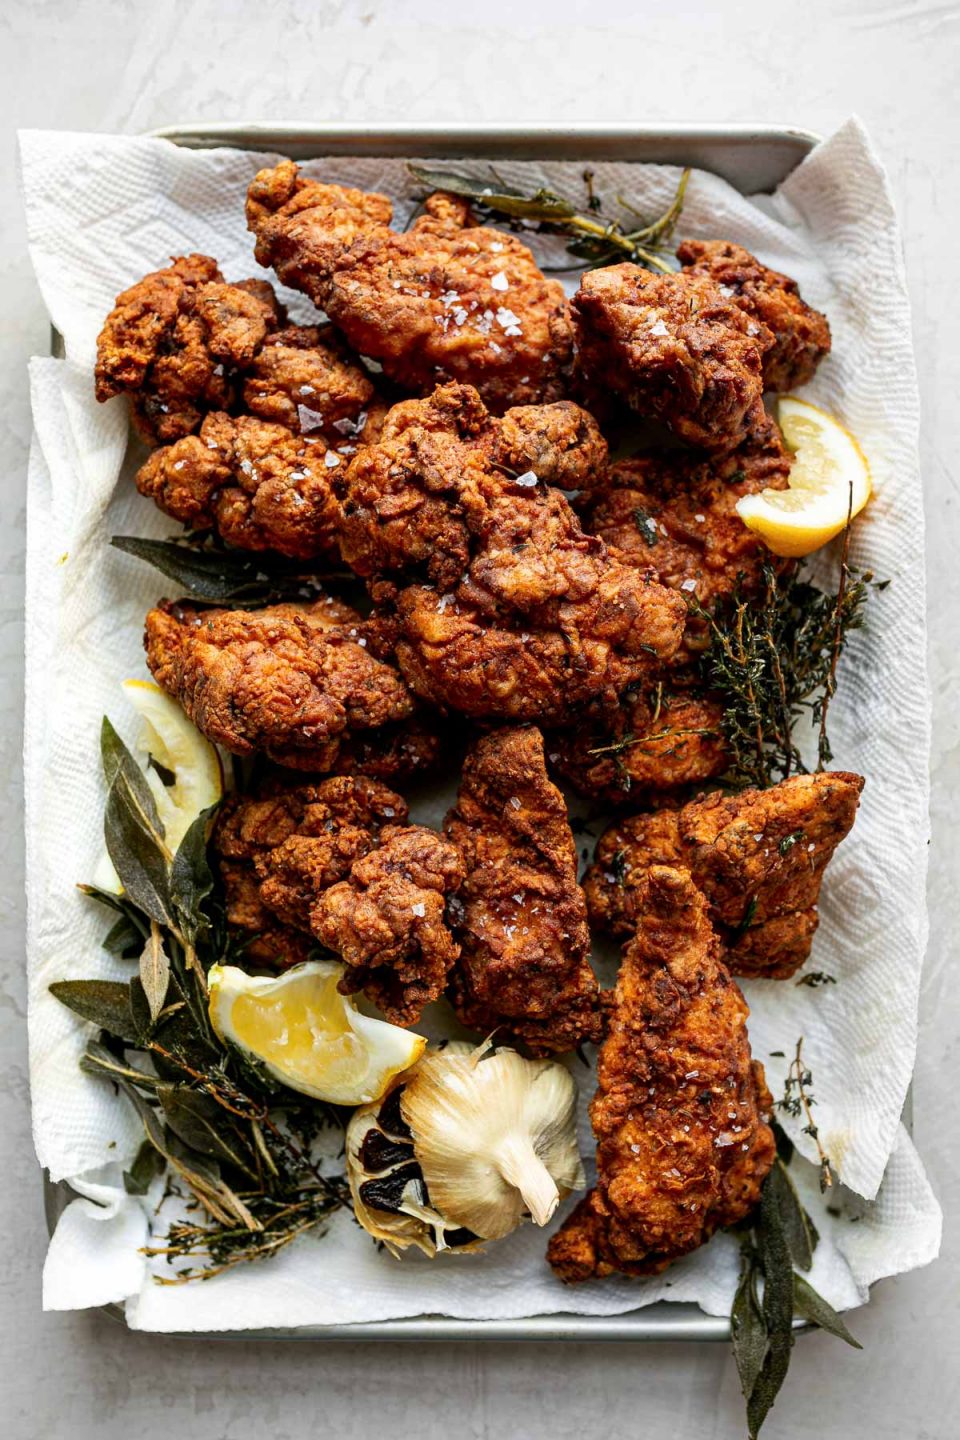 A top down shot of pieces of crispy, golden brown fried chicken, sprinkled in flaky salt, piled onto a quarter sheet pan lined with paper towels. Leftover herbs & garlic from the frying oil and lemon slices resting next to and around the pieces of chicken.